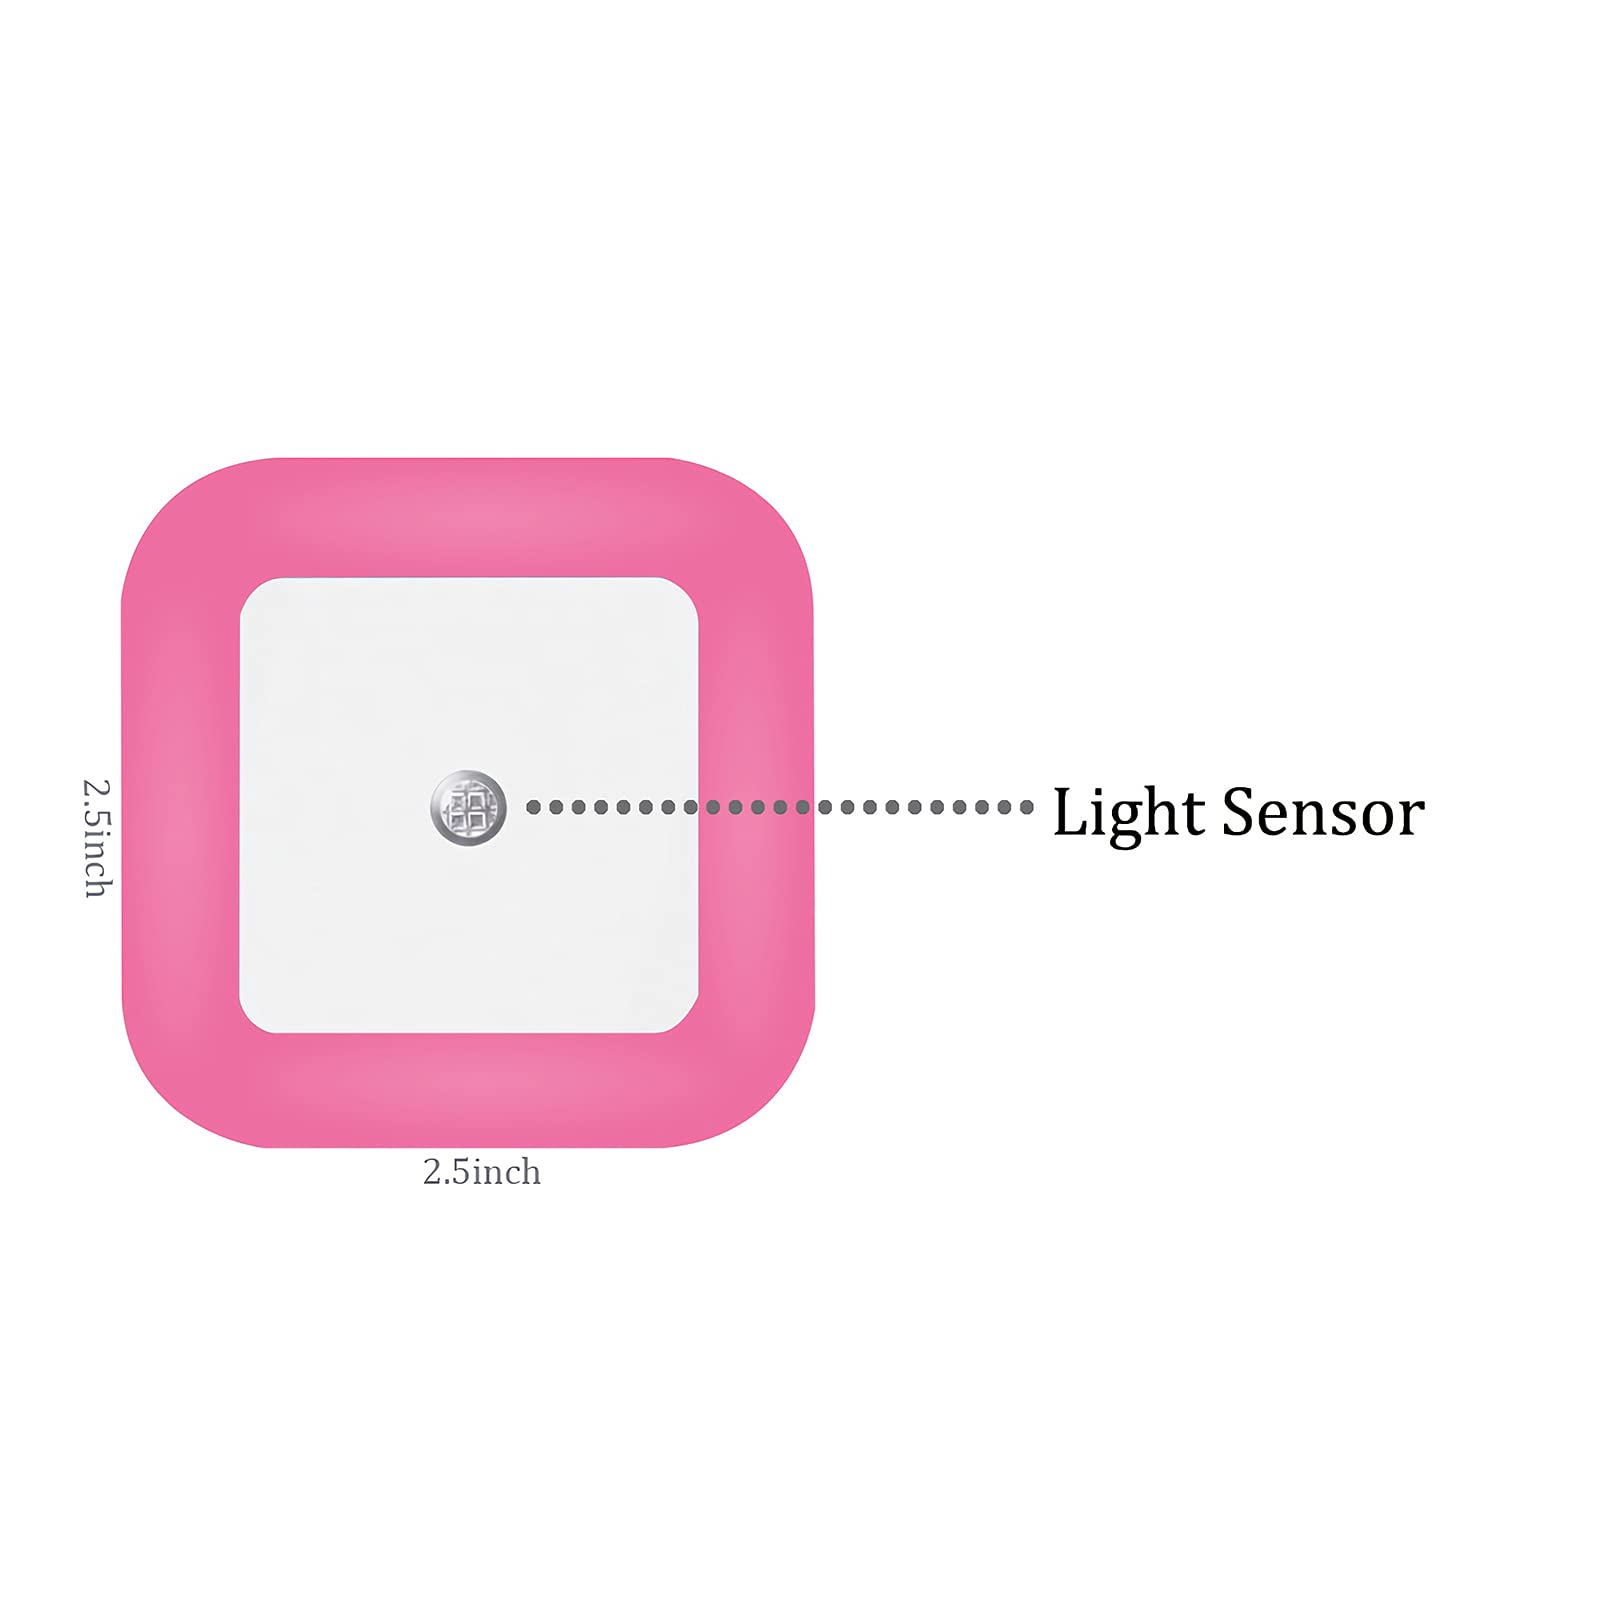 [ Pack of 4 ] Real Red LED Night Lights, Plug into Wall Lights with Light Sensor, Auto ON/Off - Suitable for Bedroom, Girls and Kid's Room (Unique Pink Cover Design)